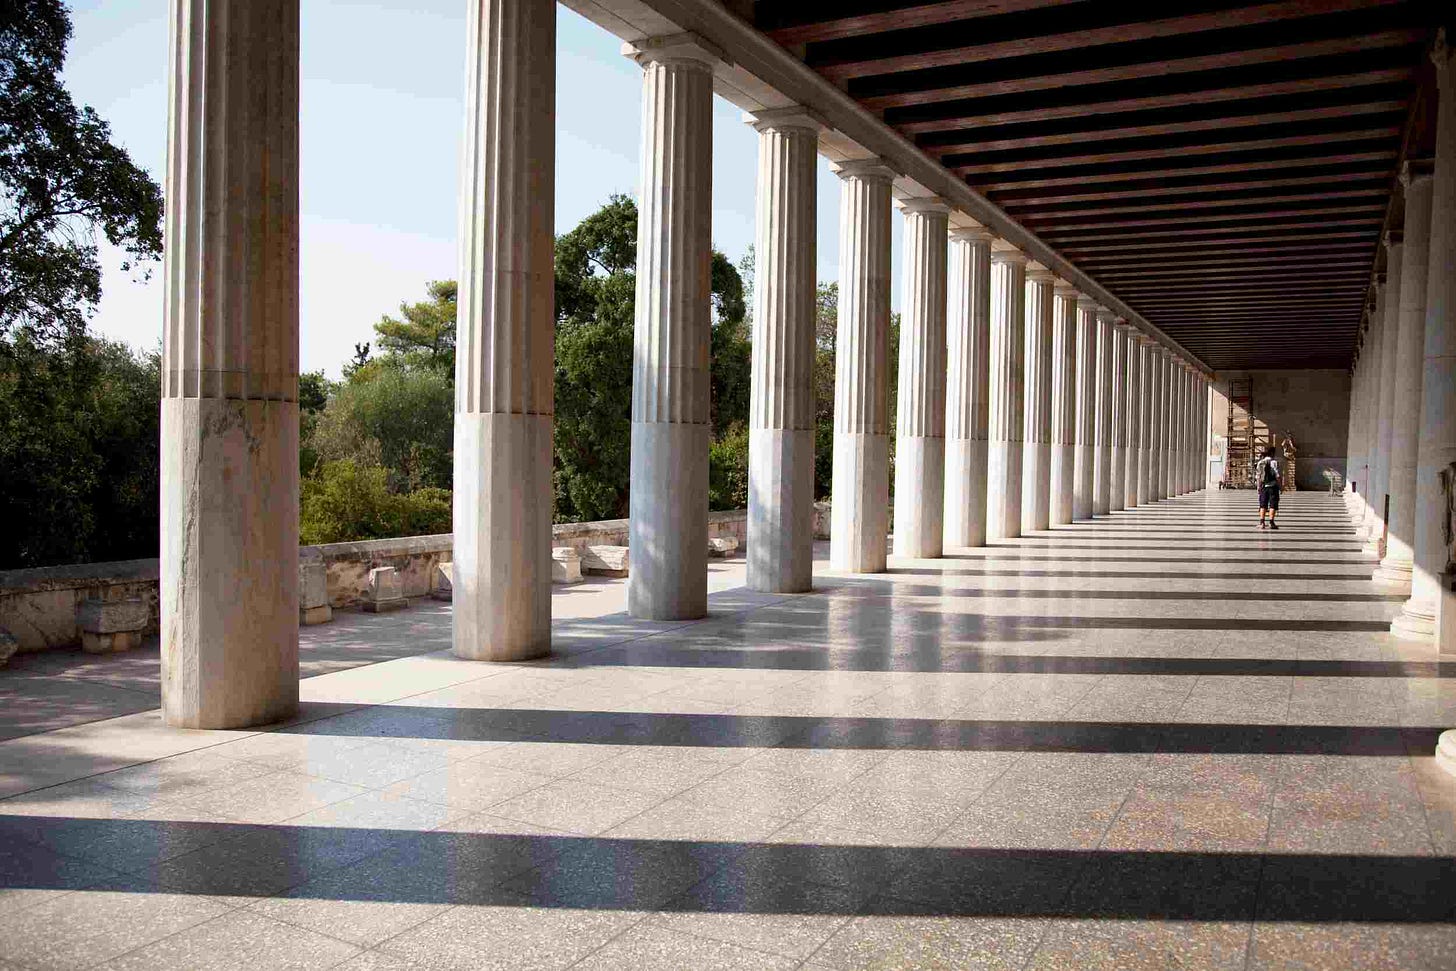 Greek Architecture - Building the Classical Greek City